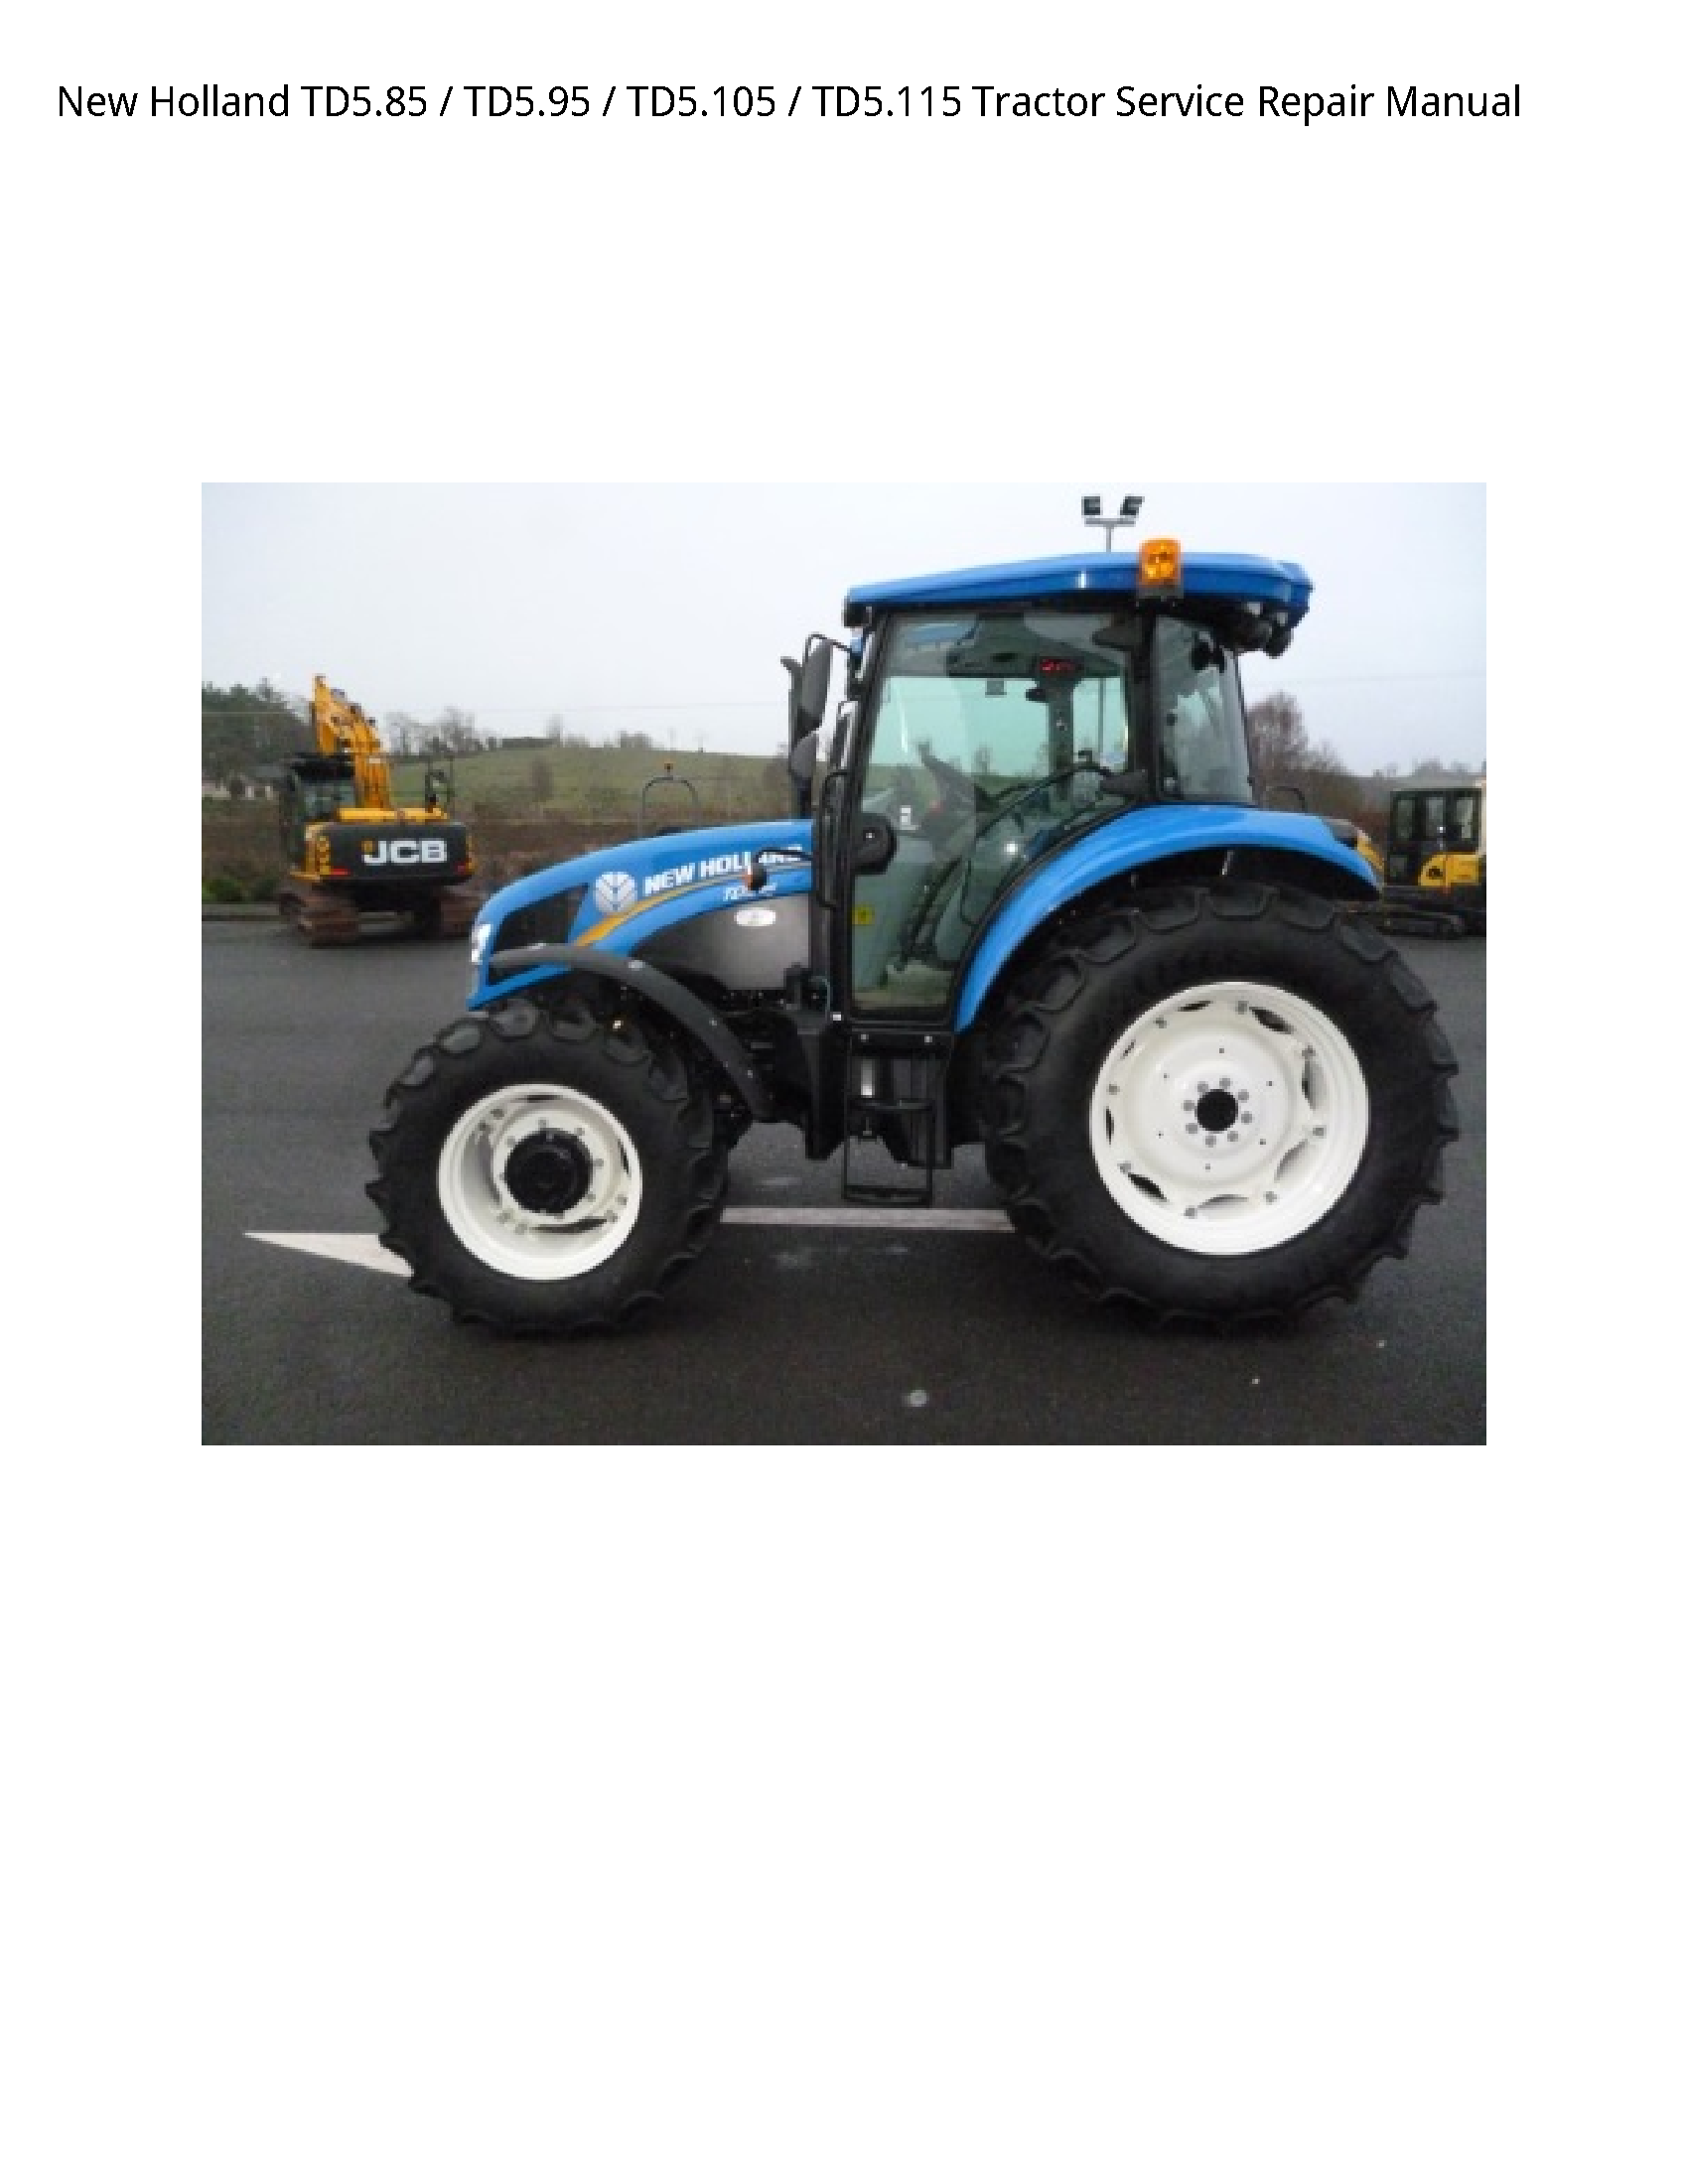 New Holland TD5.85 Tractor manual